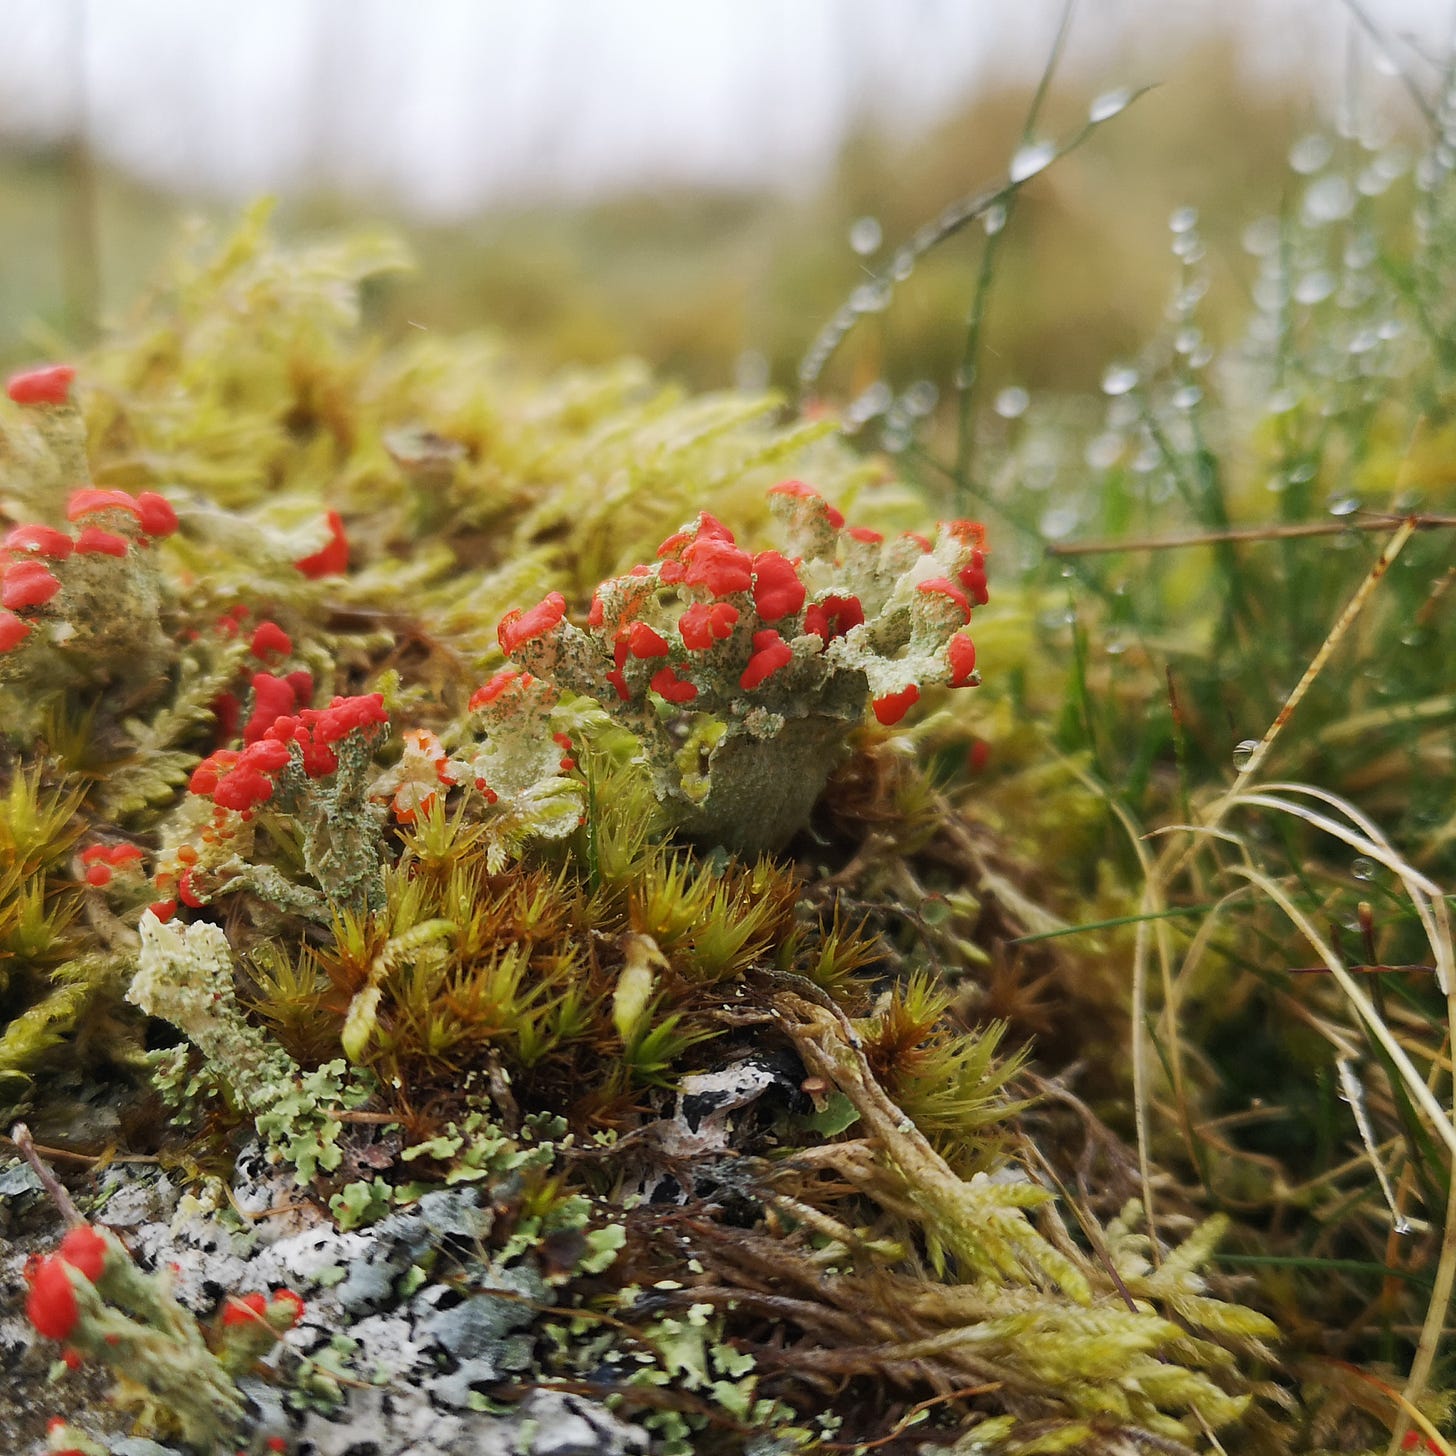  As you walk along the path, your attention is caught by an improbabe mass of red on the ground. A cluster of pale green lichens emerges from a patch of moss on a rock, forming trumpt-like shapes topped with the brightest scarlet. Behind them, the grass hold droplets of water from a recent rain.